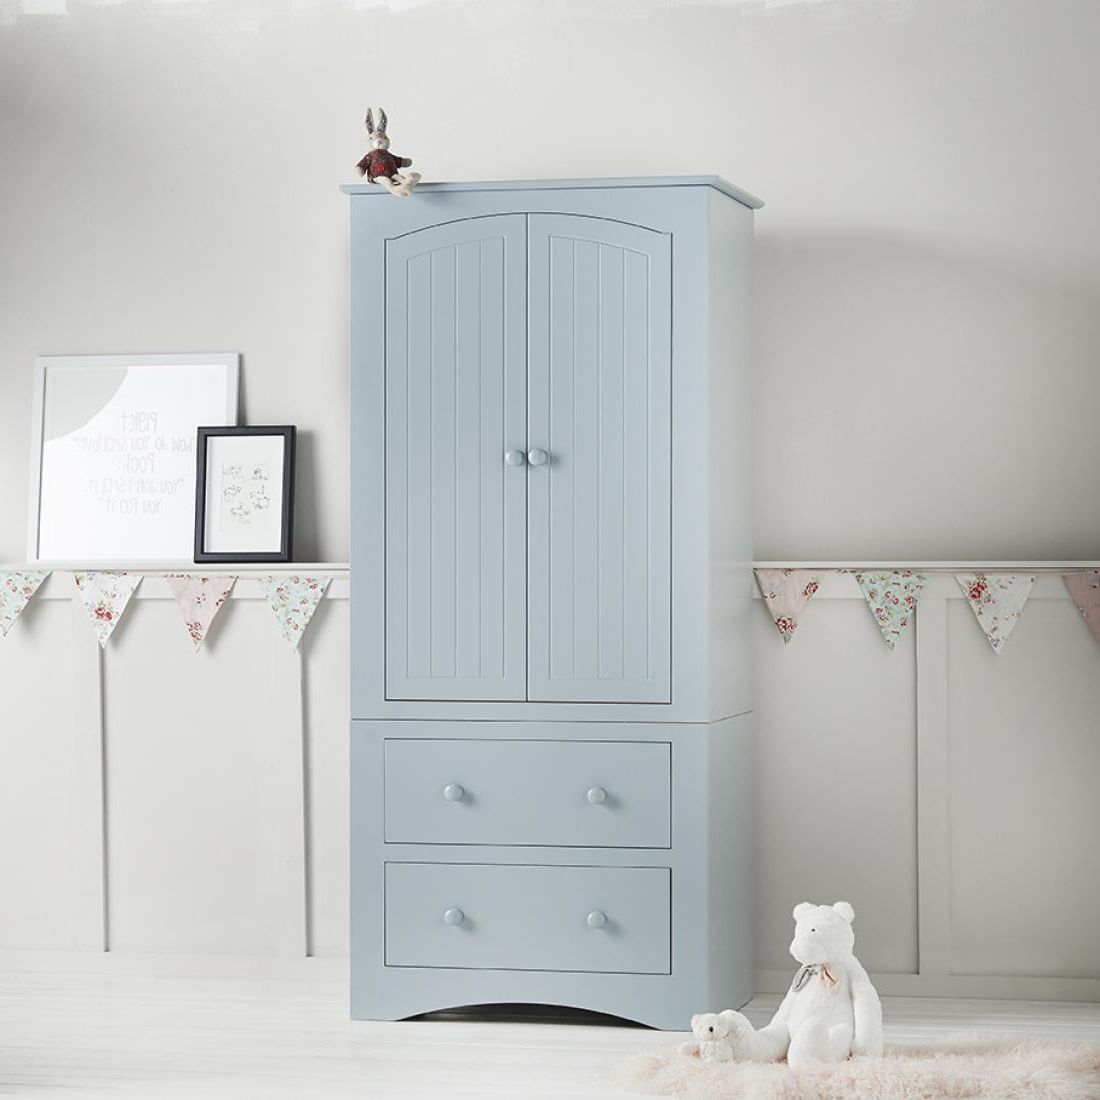 Barney And Boo 2 Drawer Wardrobe | Childs Wardrobe| Kids Bedrooms | Childrens  Furniture With Regard To Childrens Tallboy Wardrobes (View 2 of 20)